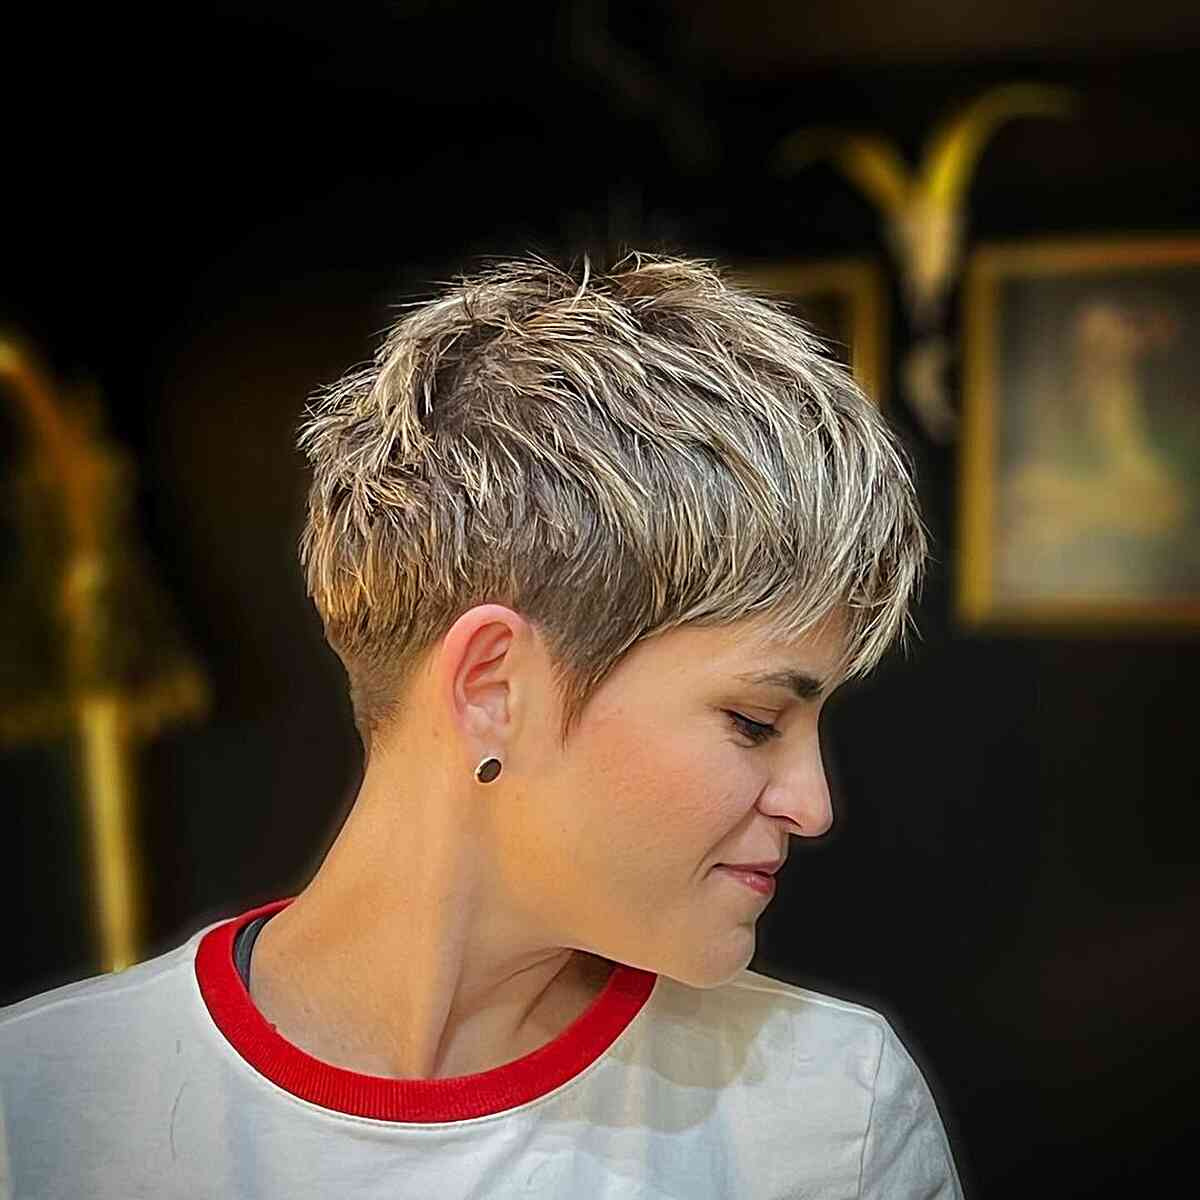 Very Short 90s Pixie Crop with Spiky Layers